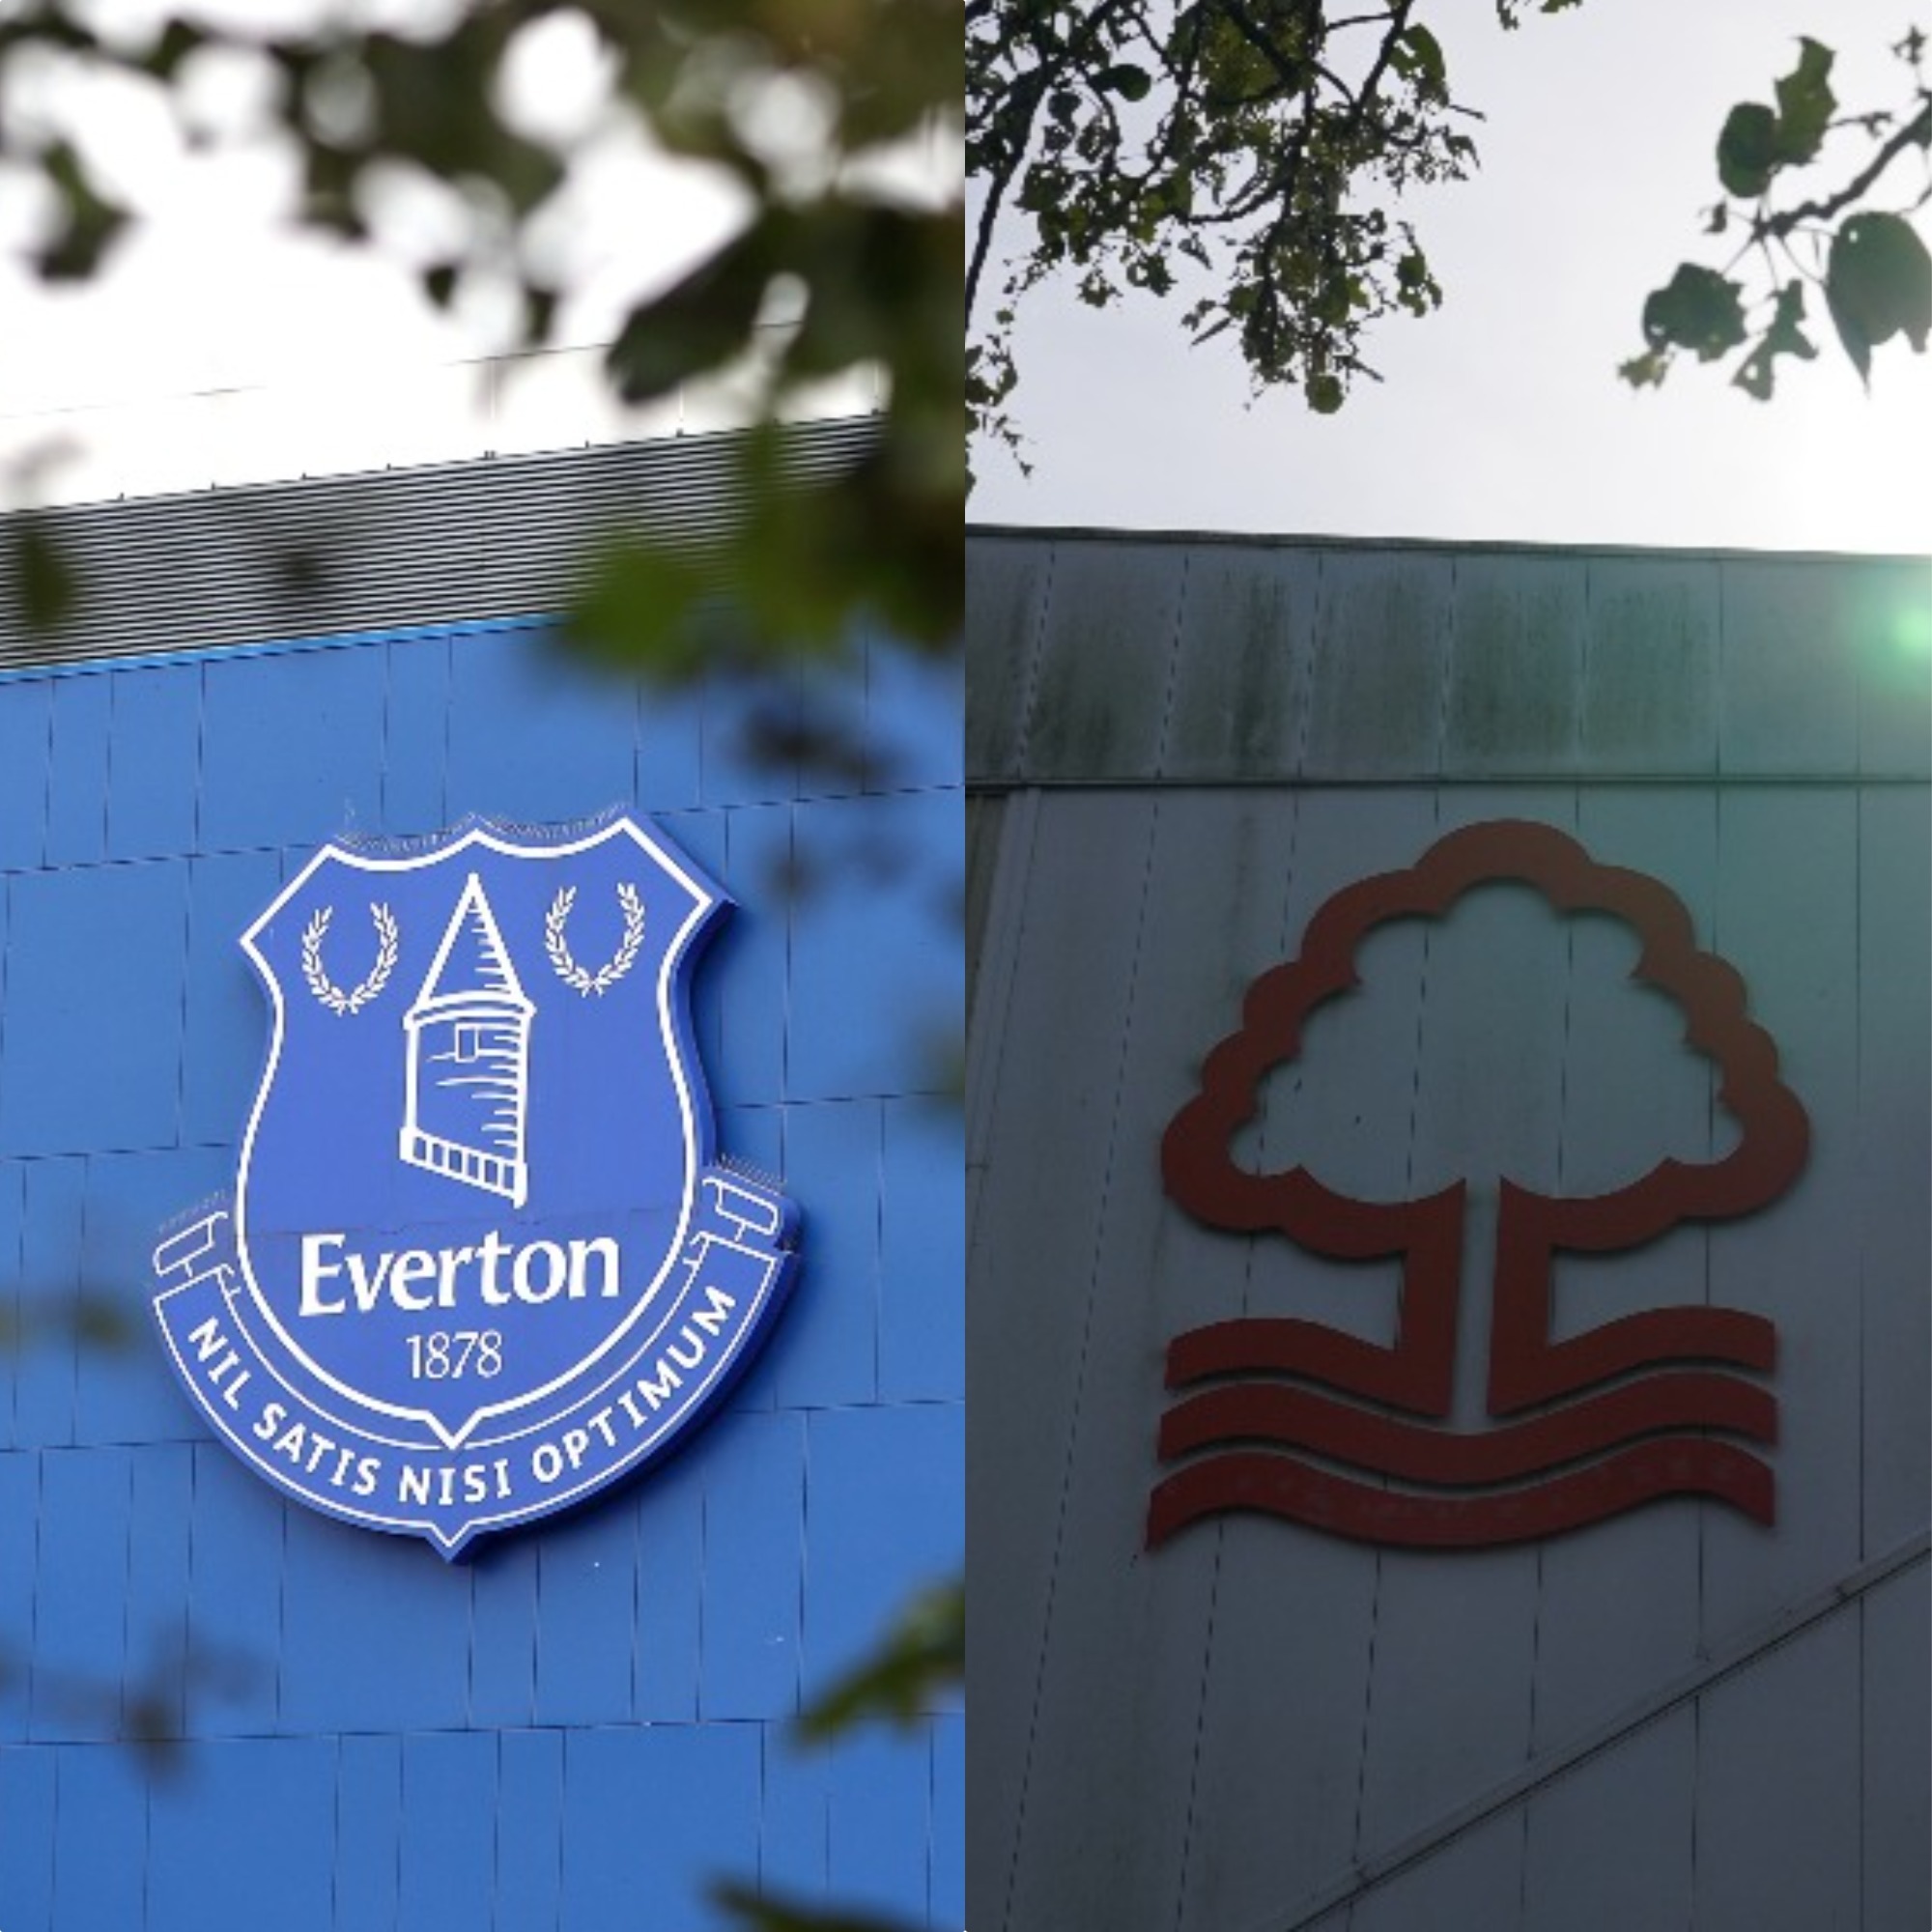 Everton and Nottingham Forest have both been sanctioned under the Premier League's financial rules this season